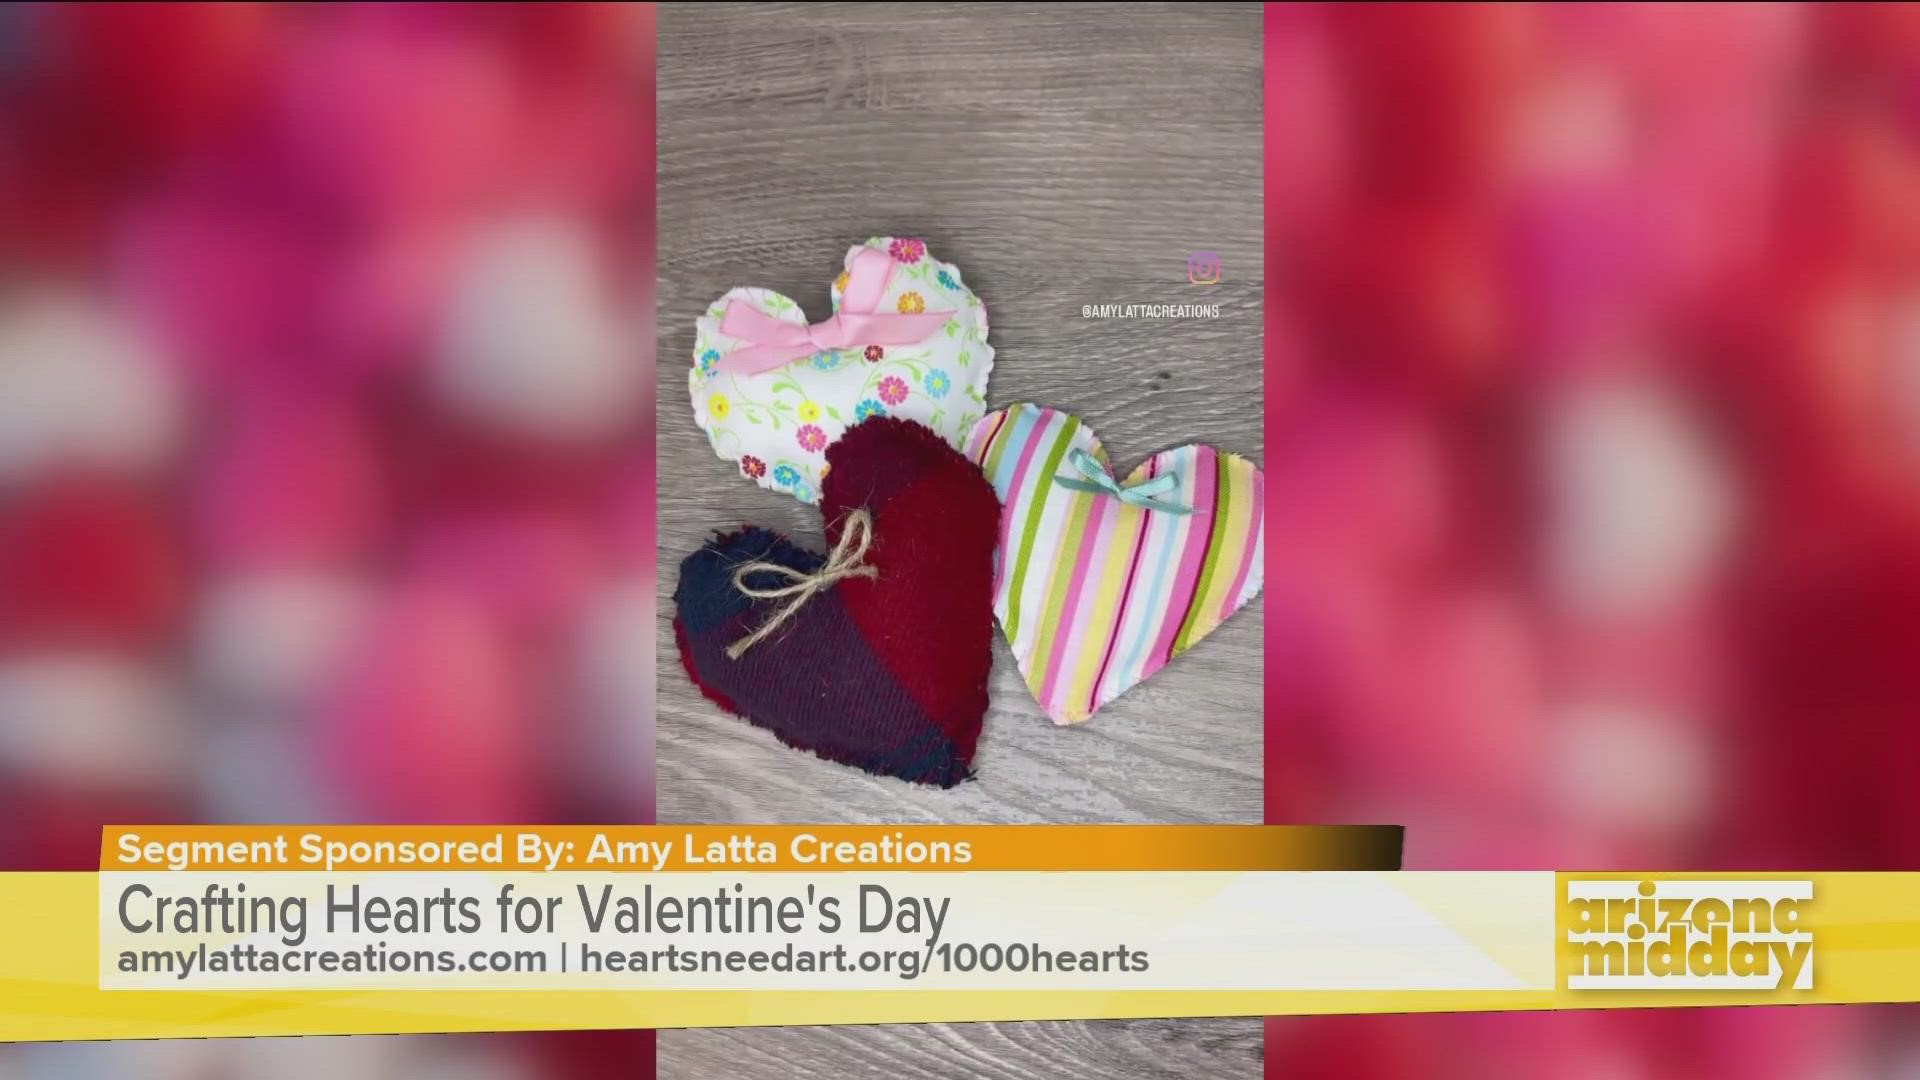 Amy Latta shows us how to make some cute and crafty hearts. She also shares how you can send these hearts to hospital patients and help raise money for the arts!